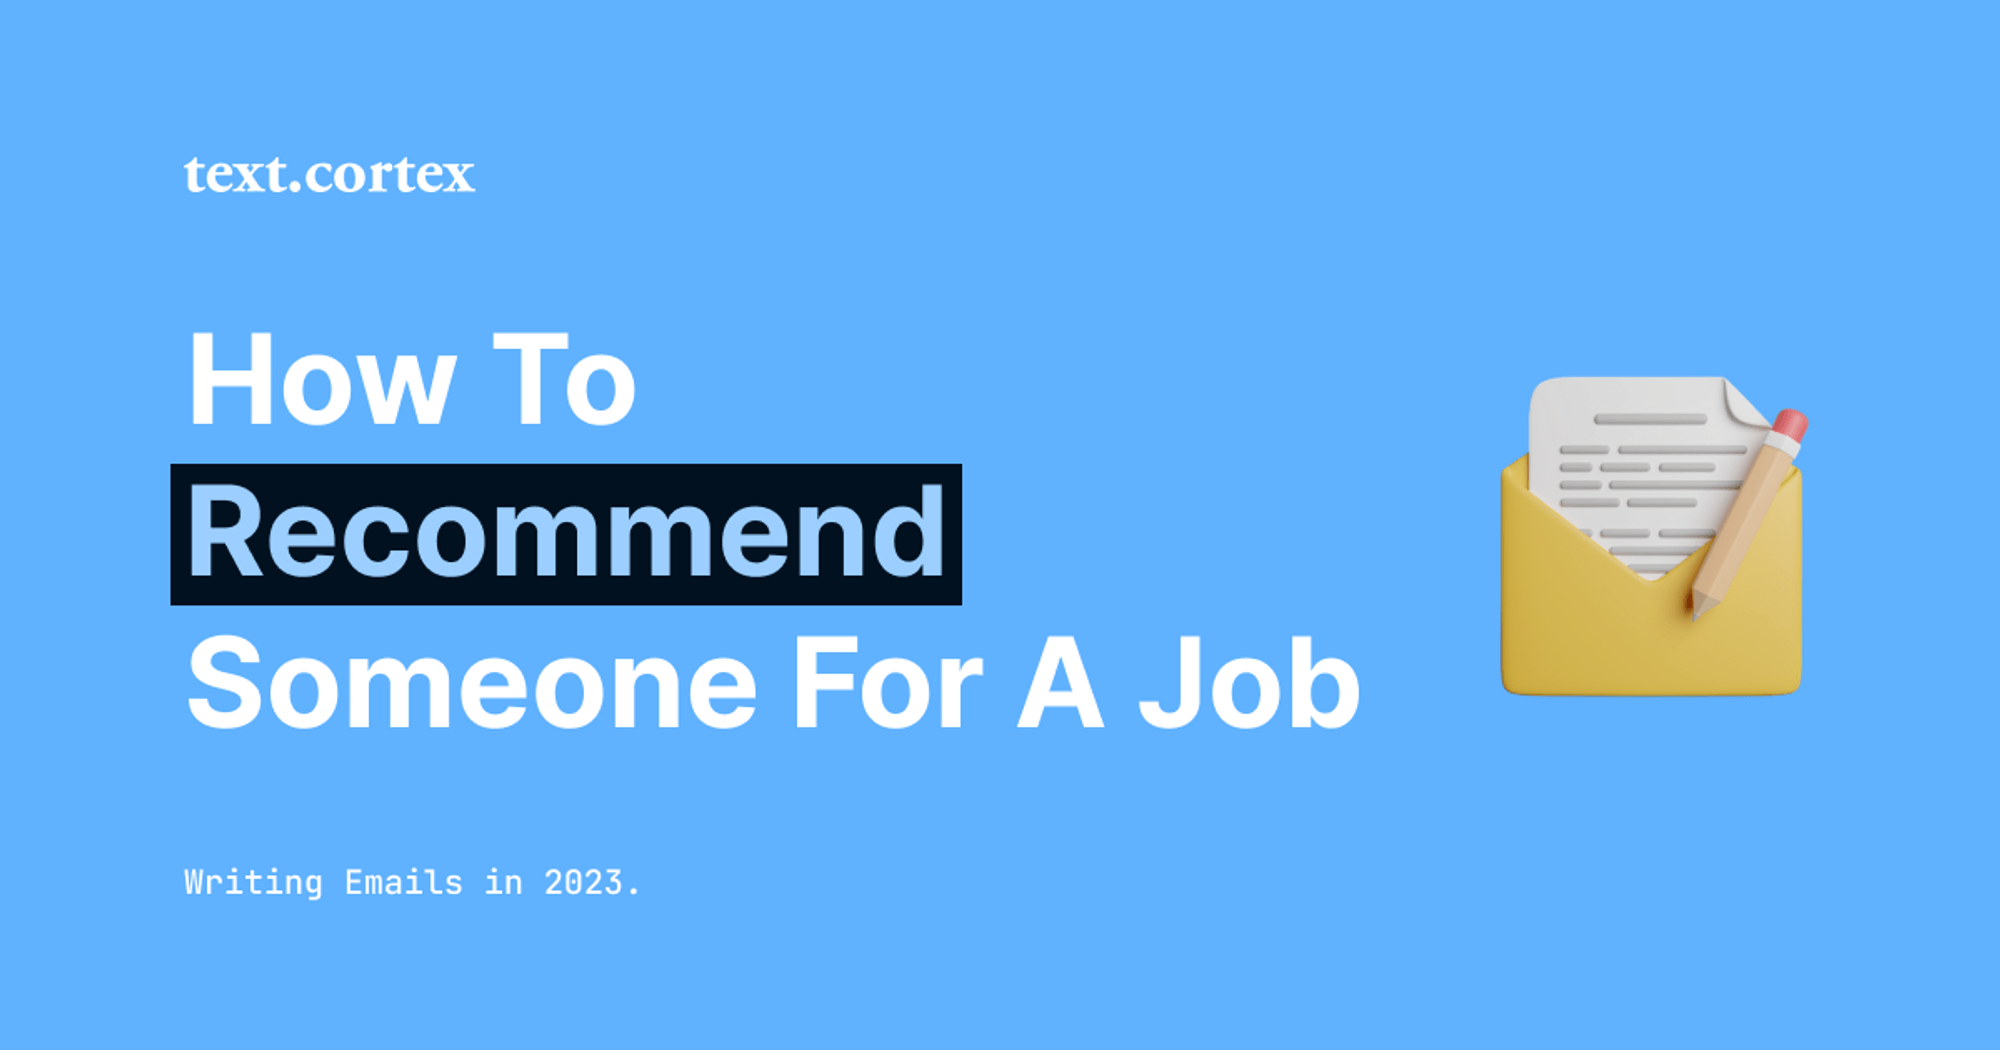 How To Write an Email Recommending Someone for a Job in 2024